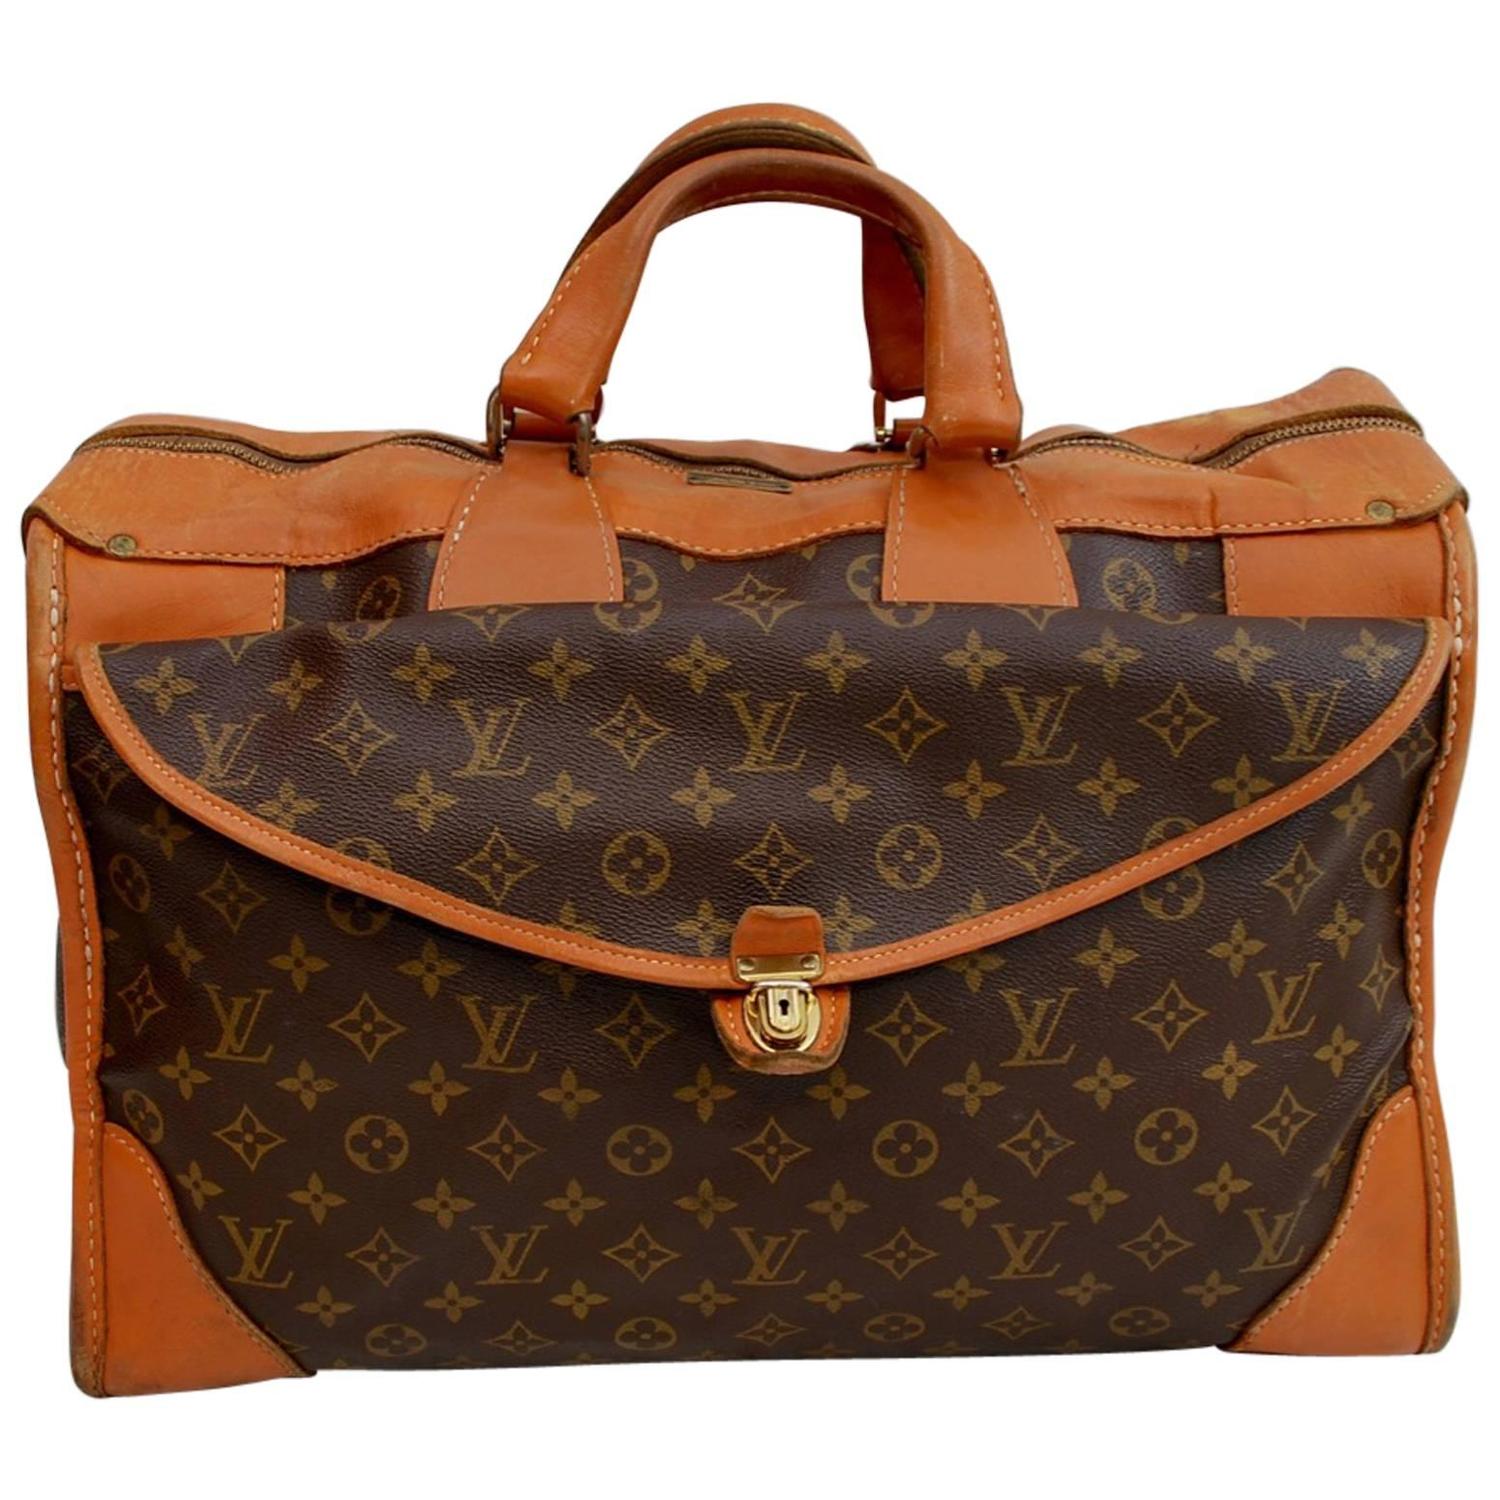 Louis Vuitton Bags At Saks 5th Ave | SEMA Data Co-op